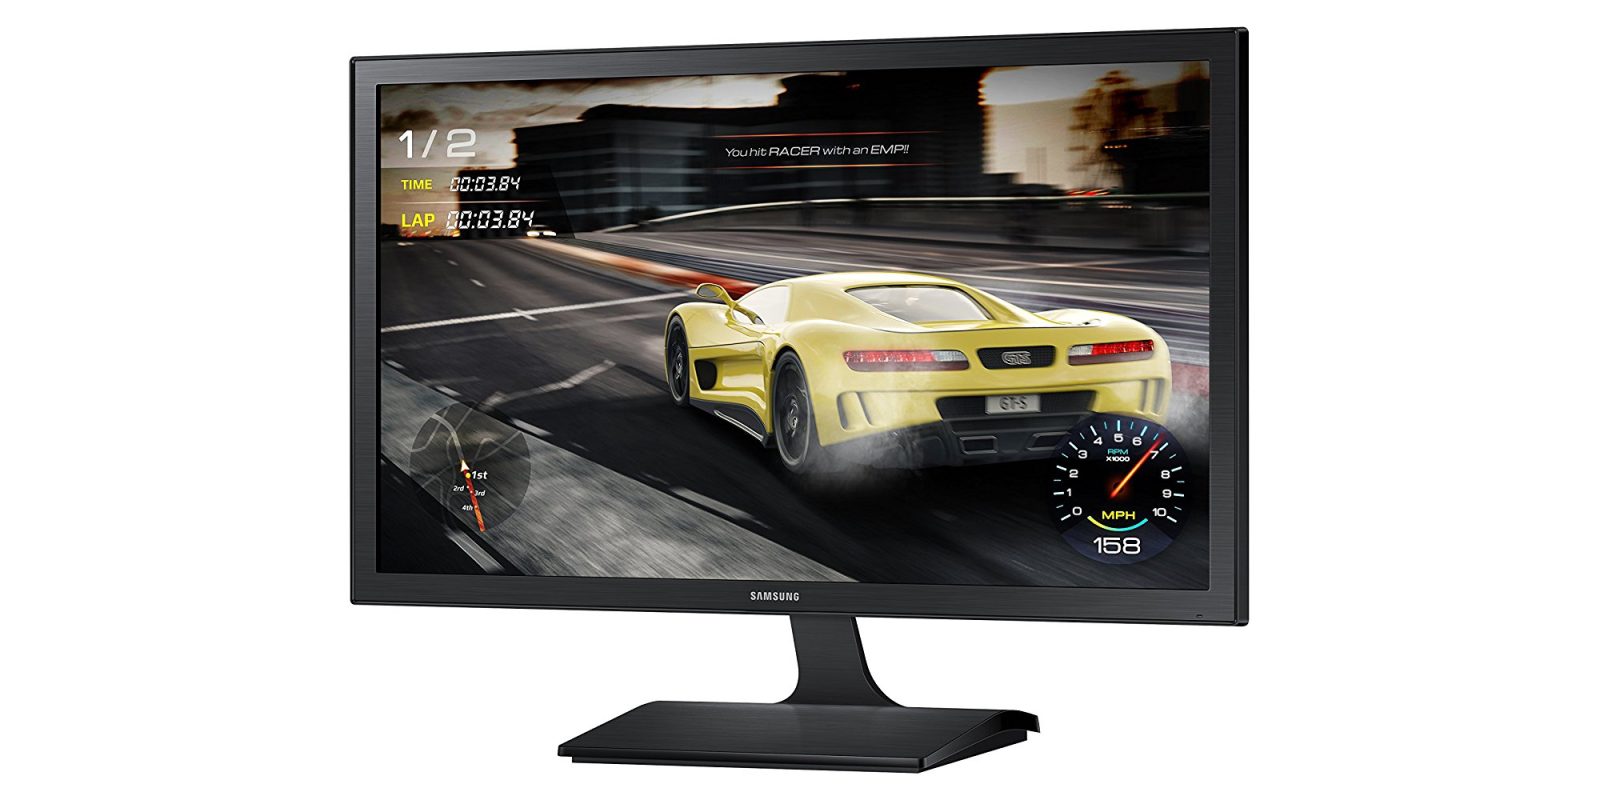 Samsung 27-inch Gaming Monitor has 1 HDMI input for $133 ...